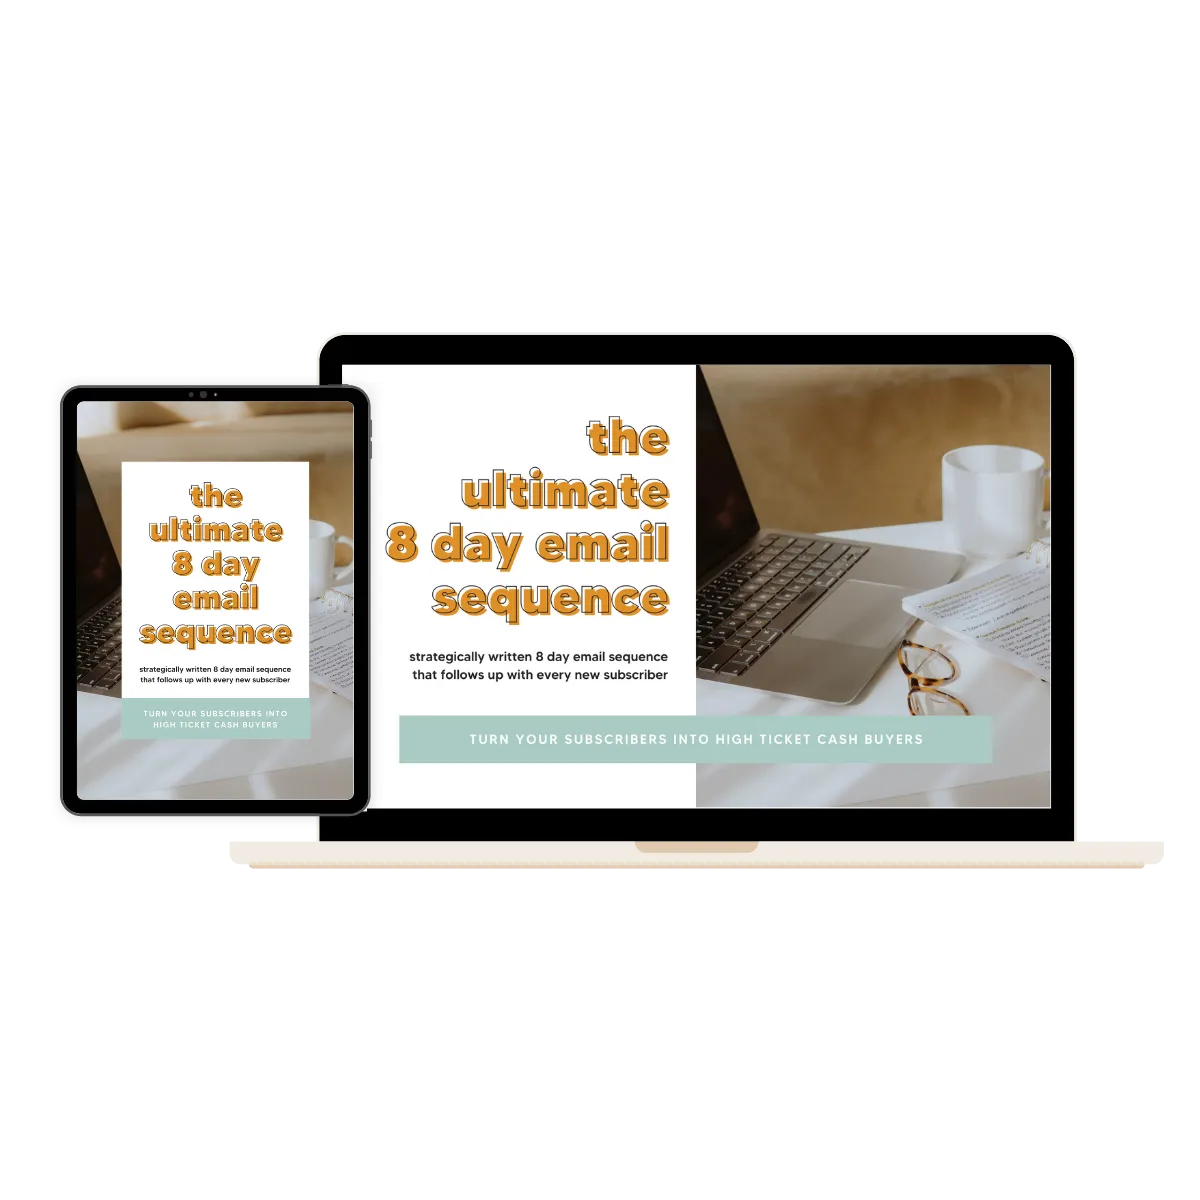 The Ultimate 8 Day Email Sequence